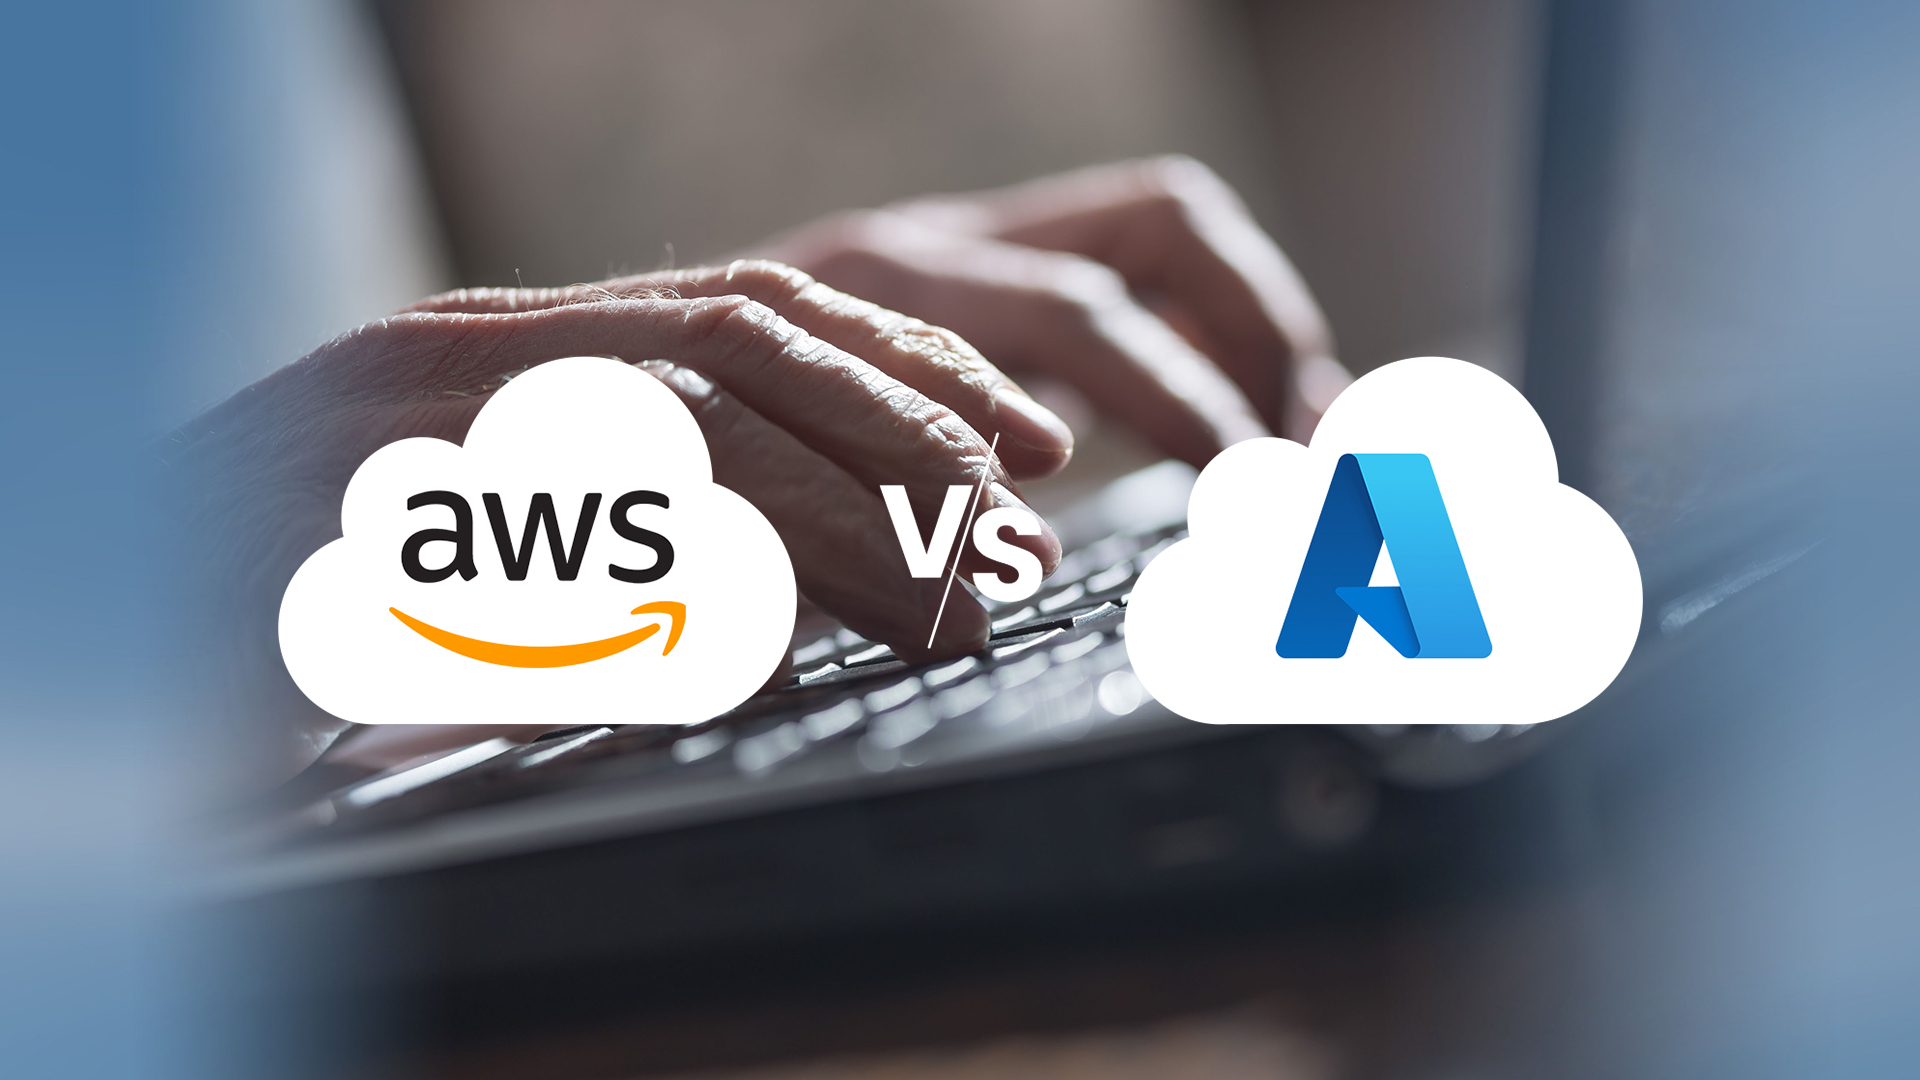 https://www.clinkitsolutions.com/why-azure-is-better-than-aws/